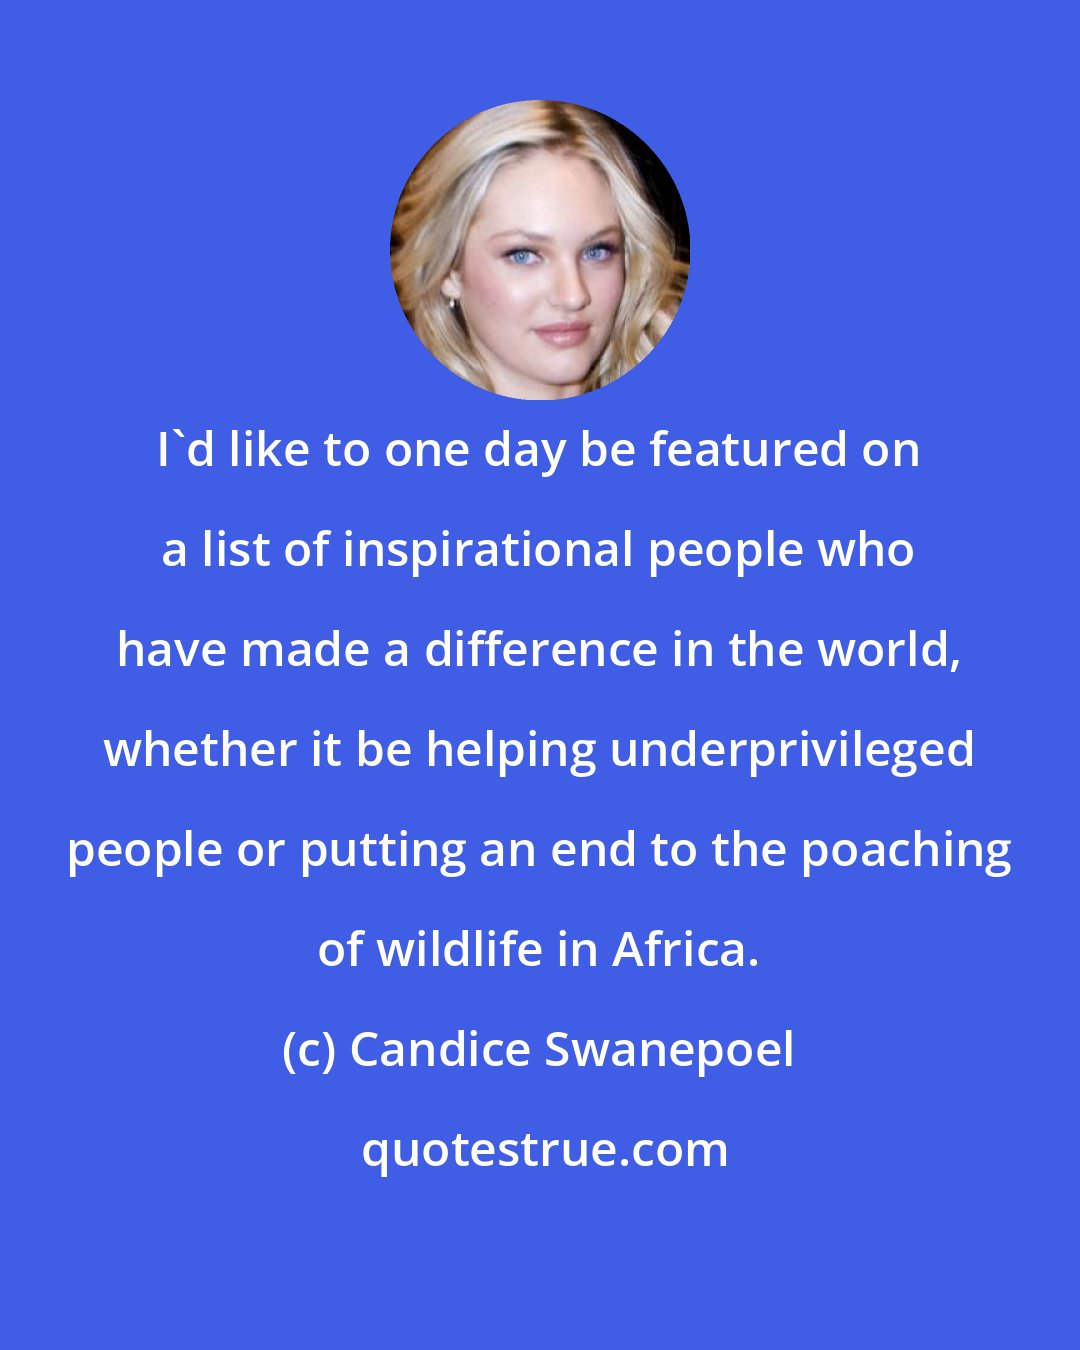 Candice Swanepoel: I'd like to one day be featured on a list of inspirational people who have made a difference in the world, whether it be helping underprivileged people or putting an end to the poaching of wildlife in Africa.